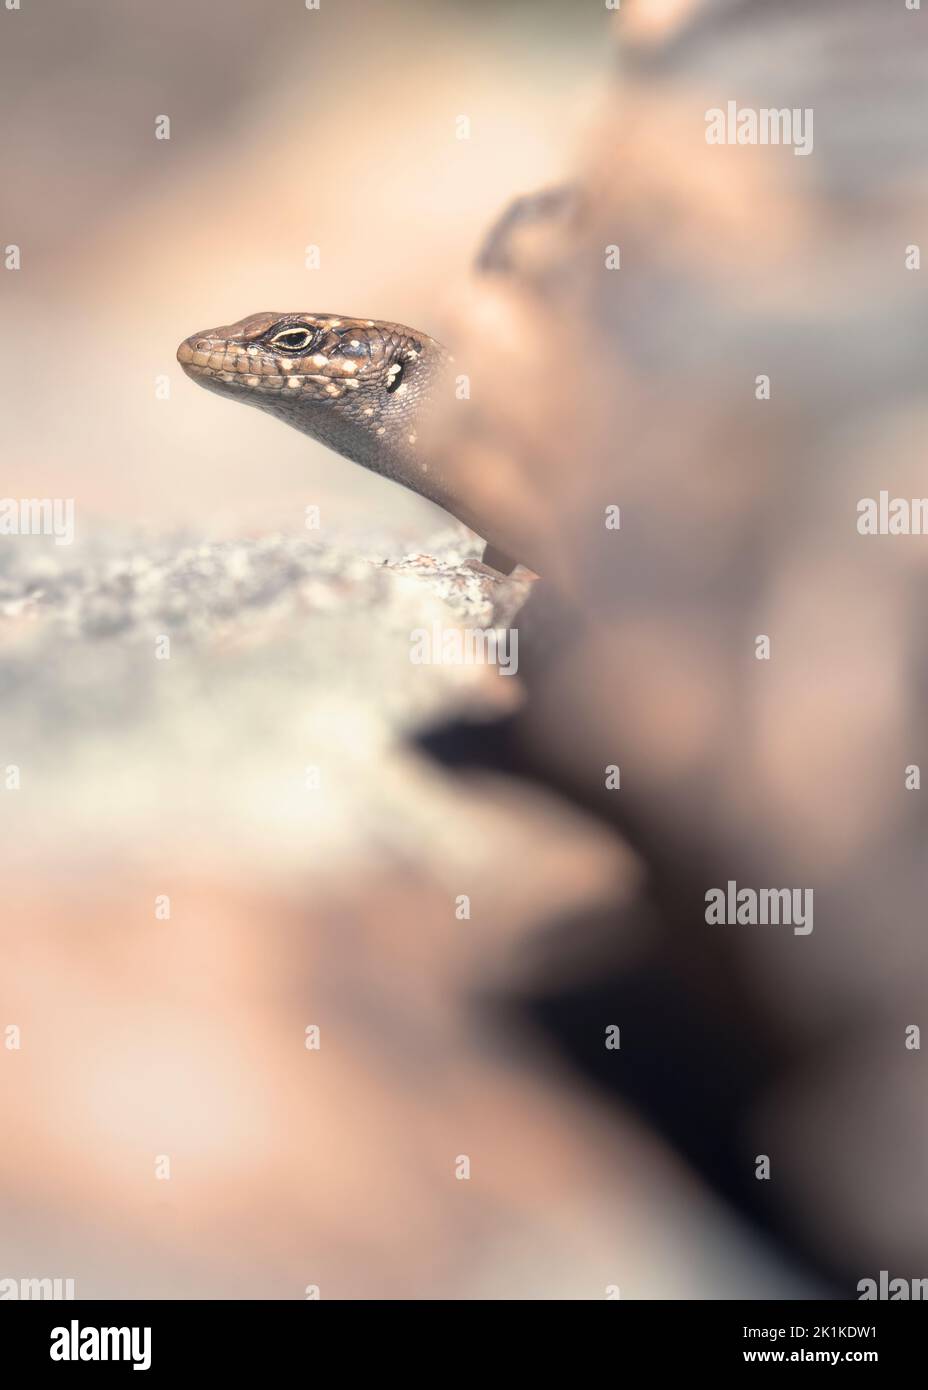 Portrait of a Central Ranges rock-skink (Liopholis margaretae) peering out from a rocky outcrop, Australia Stock Photo